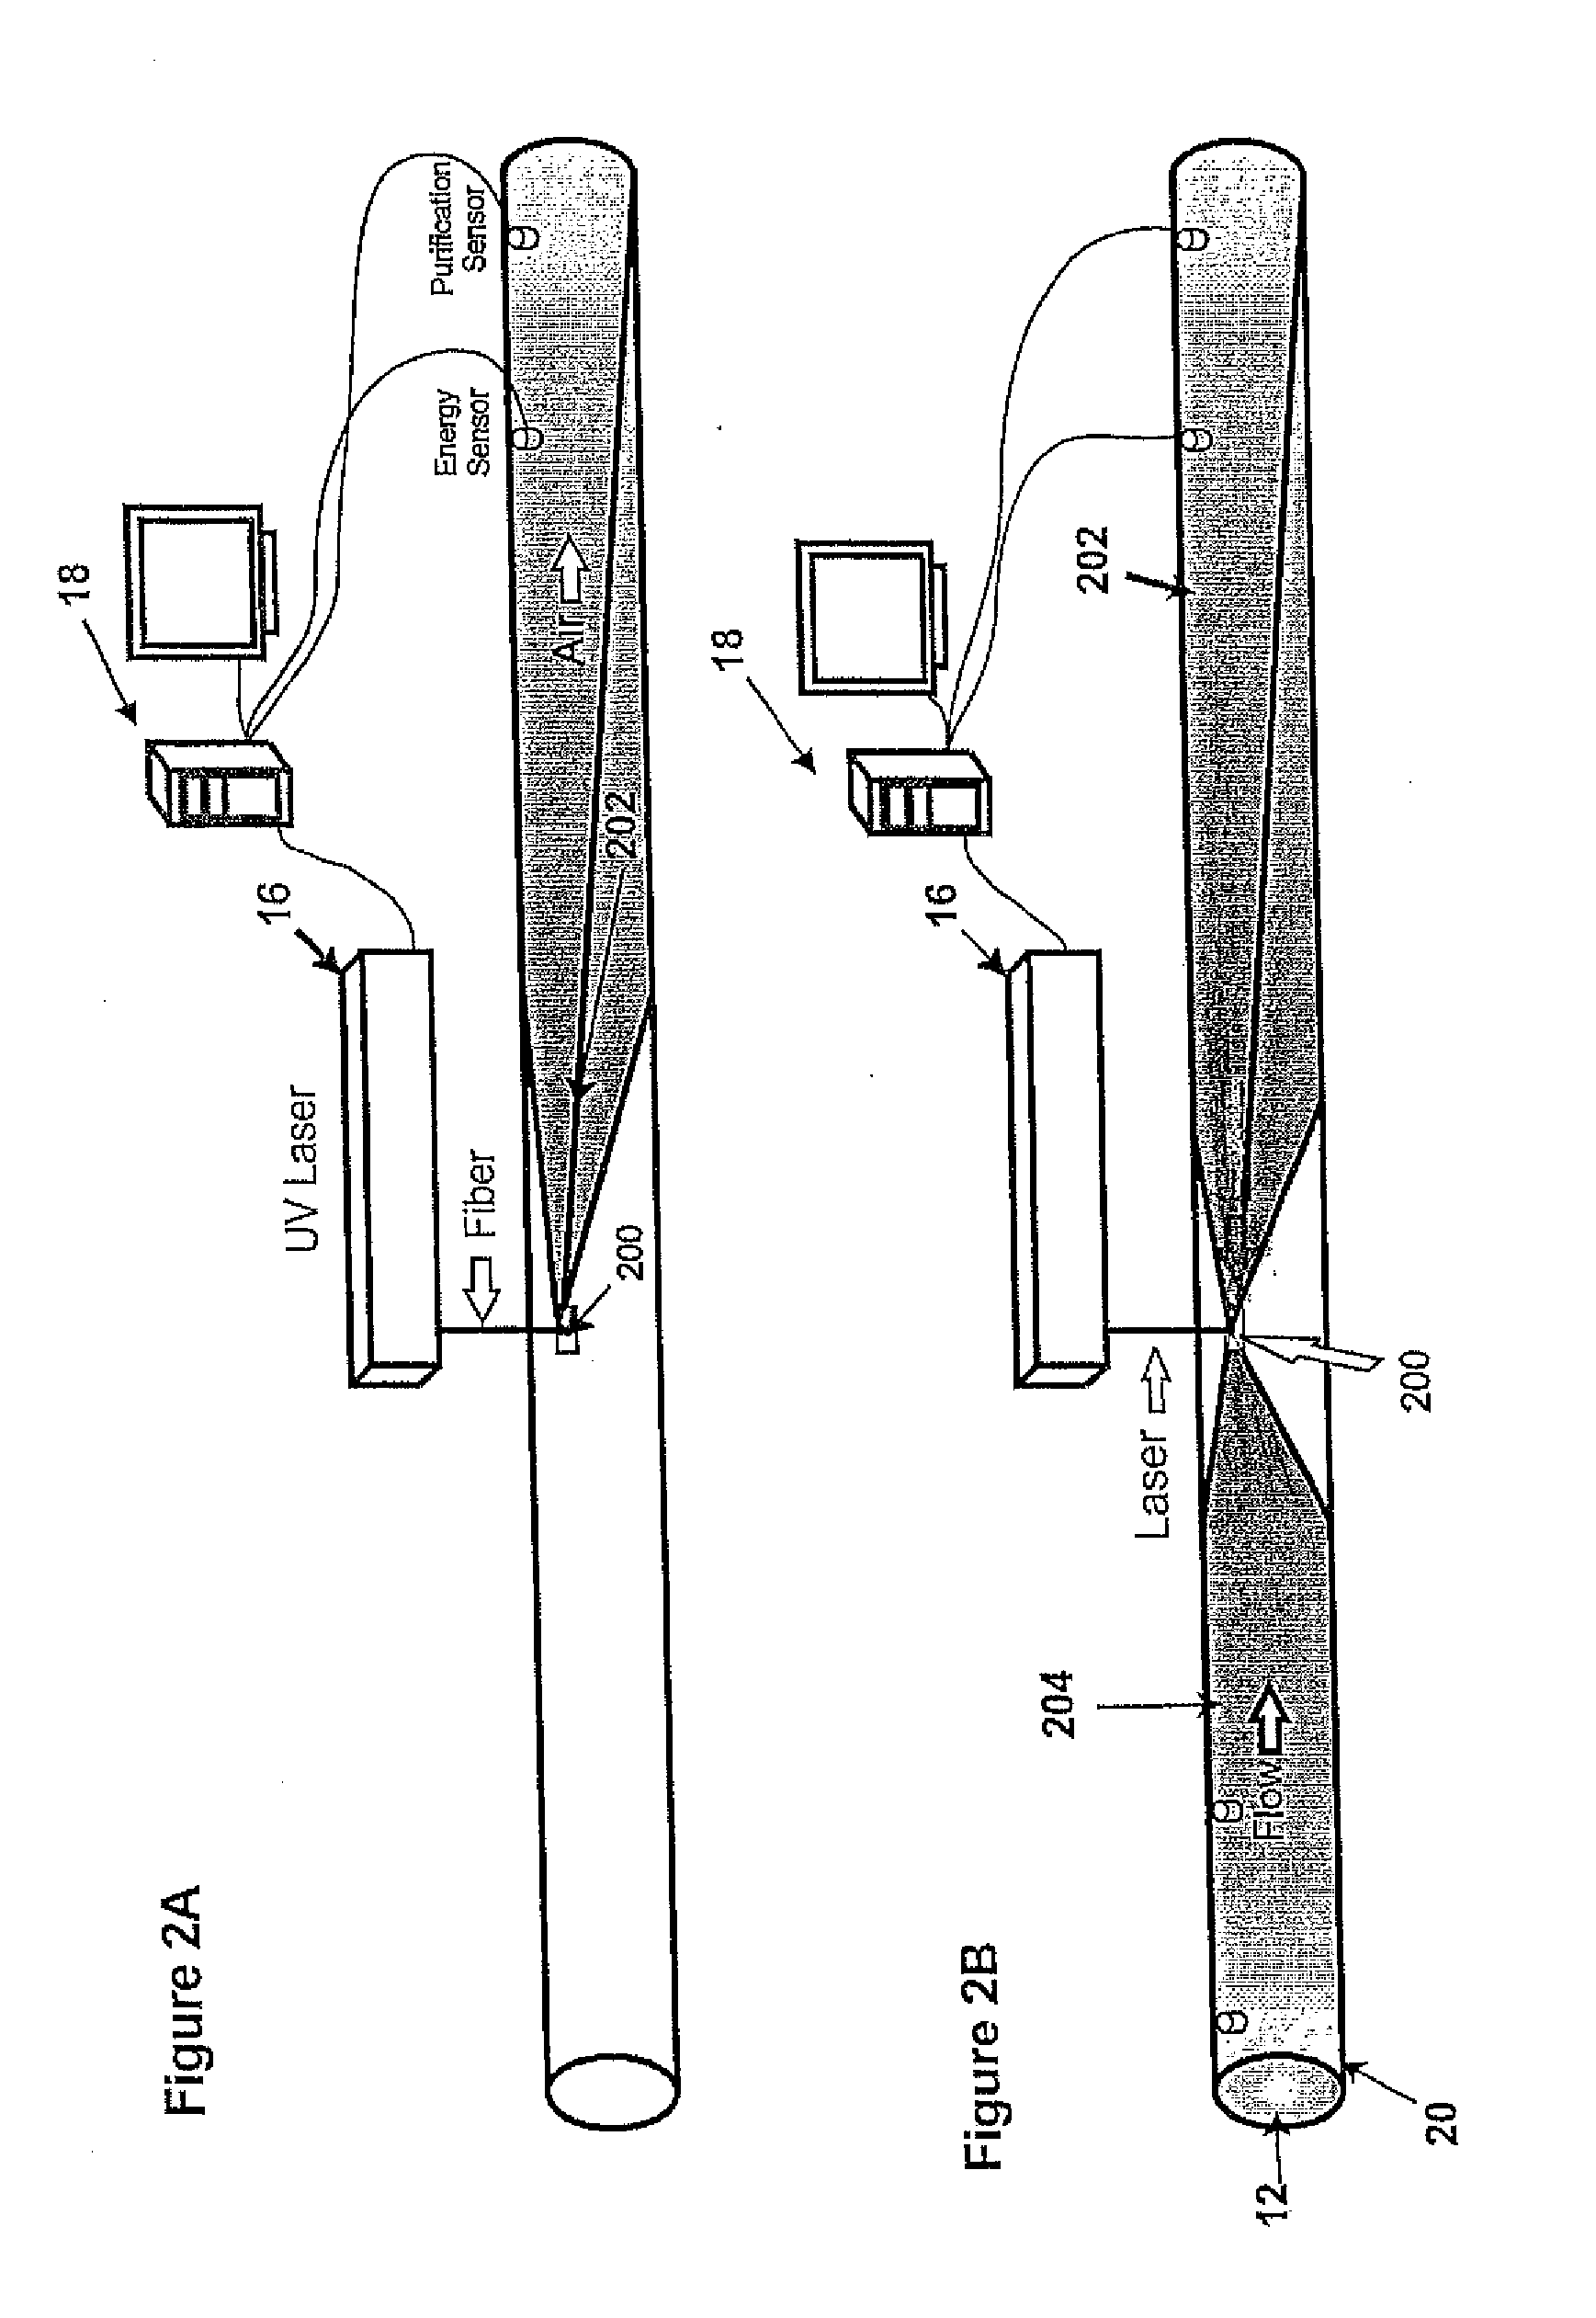 Method & apparatus for sanitizing air in aircraft, commercial airliners, military vehicles, submarines, space craft, cruise ships , passenger vehicles, mass transit and motor vehicles by integration of high density high efficiency ultra violet illumination apparatus within air conditioning, ventilation and temperature control systems